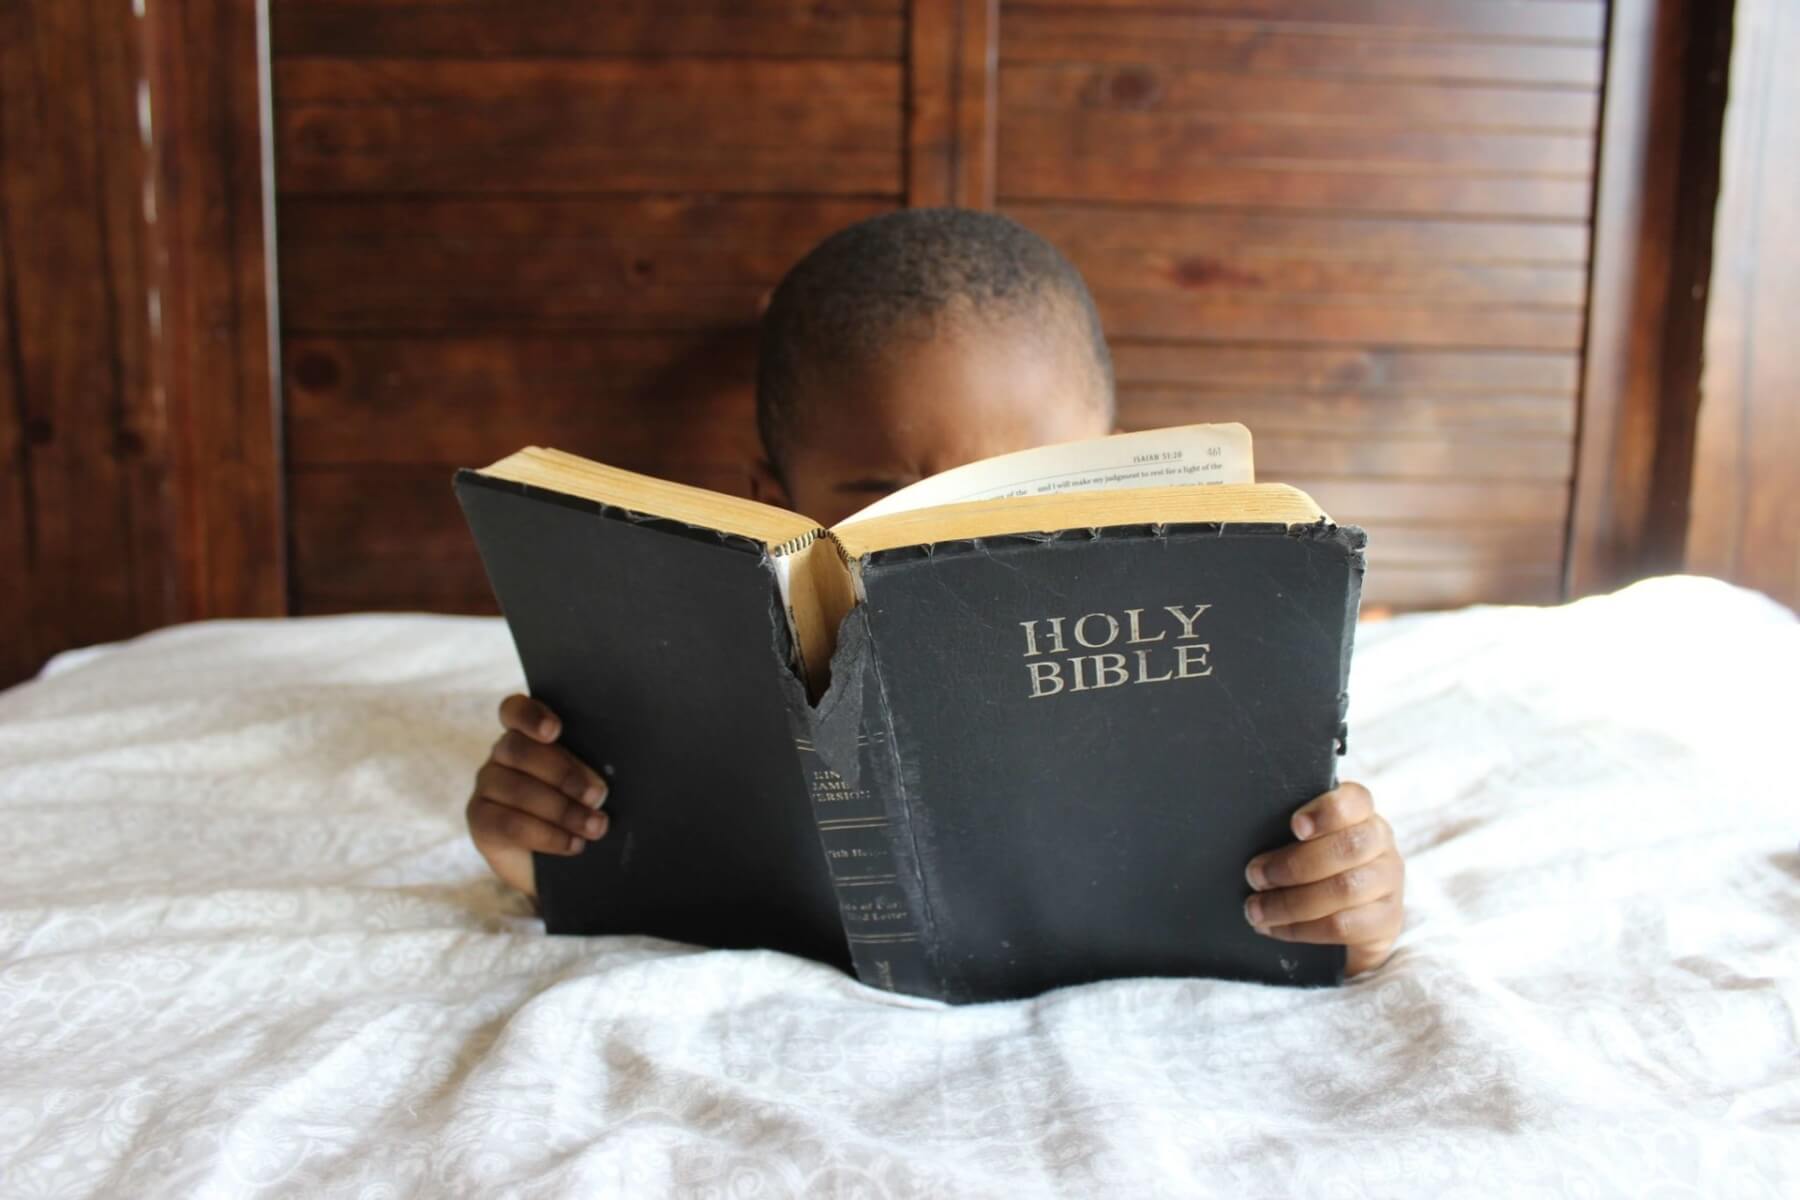 How to Read and Understand the Bible: Approach, Reading Plans, & More